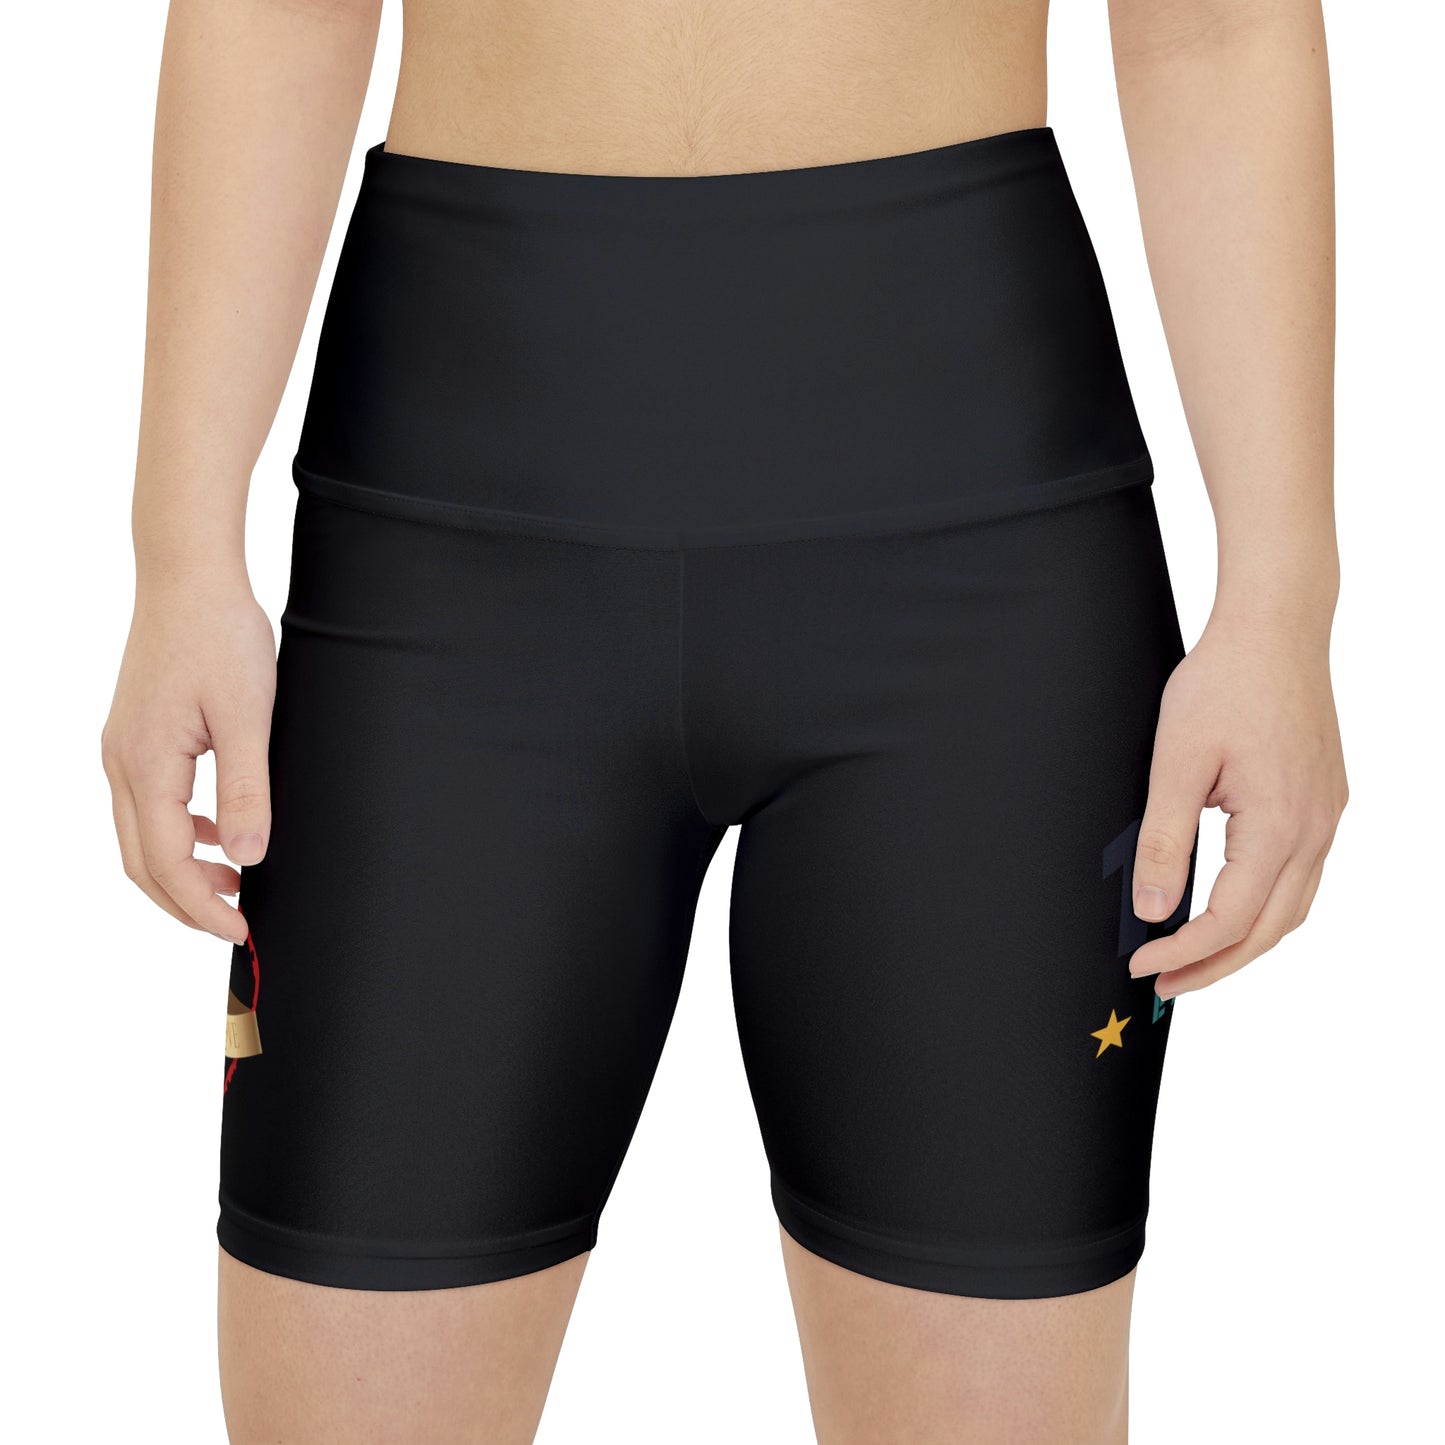 Protected by Love Women's Workout Shorts